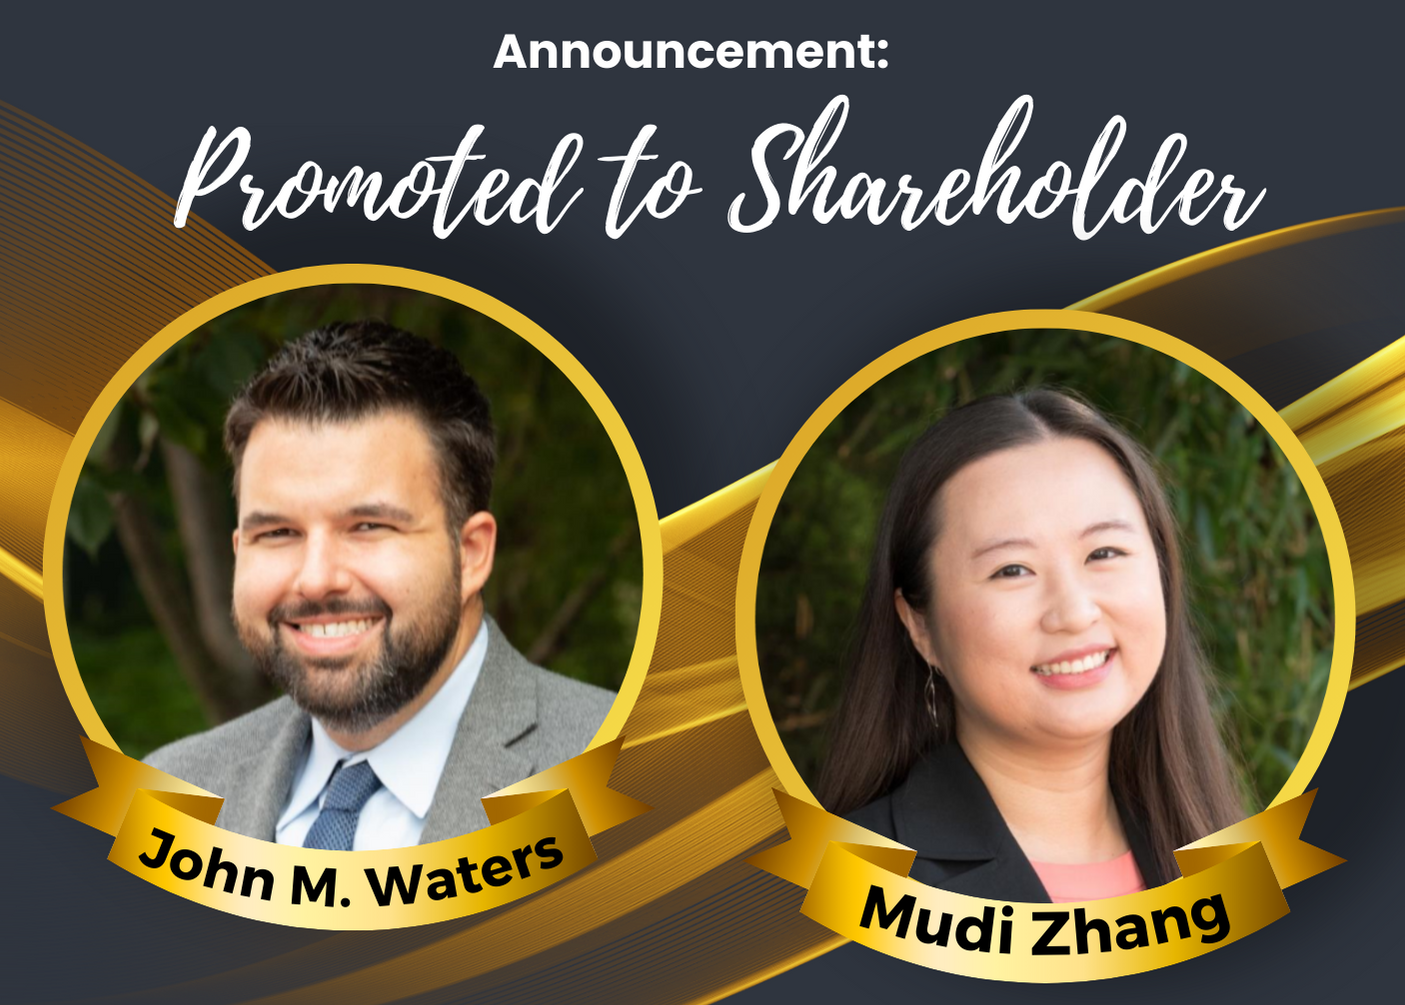 WEC Announces Promotion of John M. Waters and Mudi Zhang to Shareholder